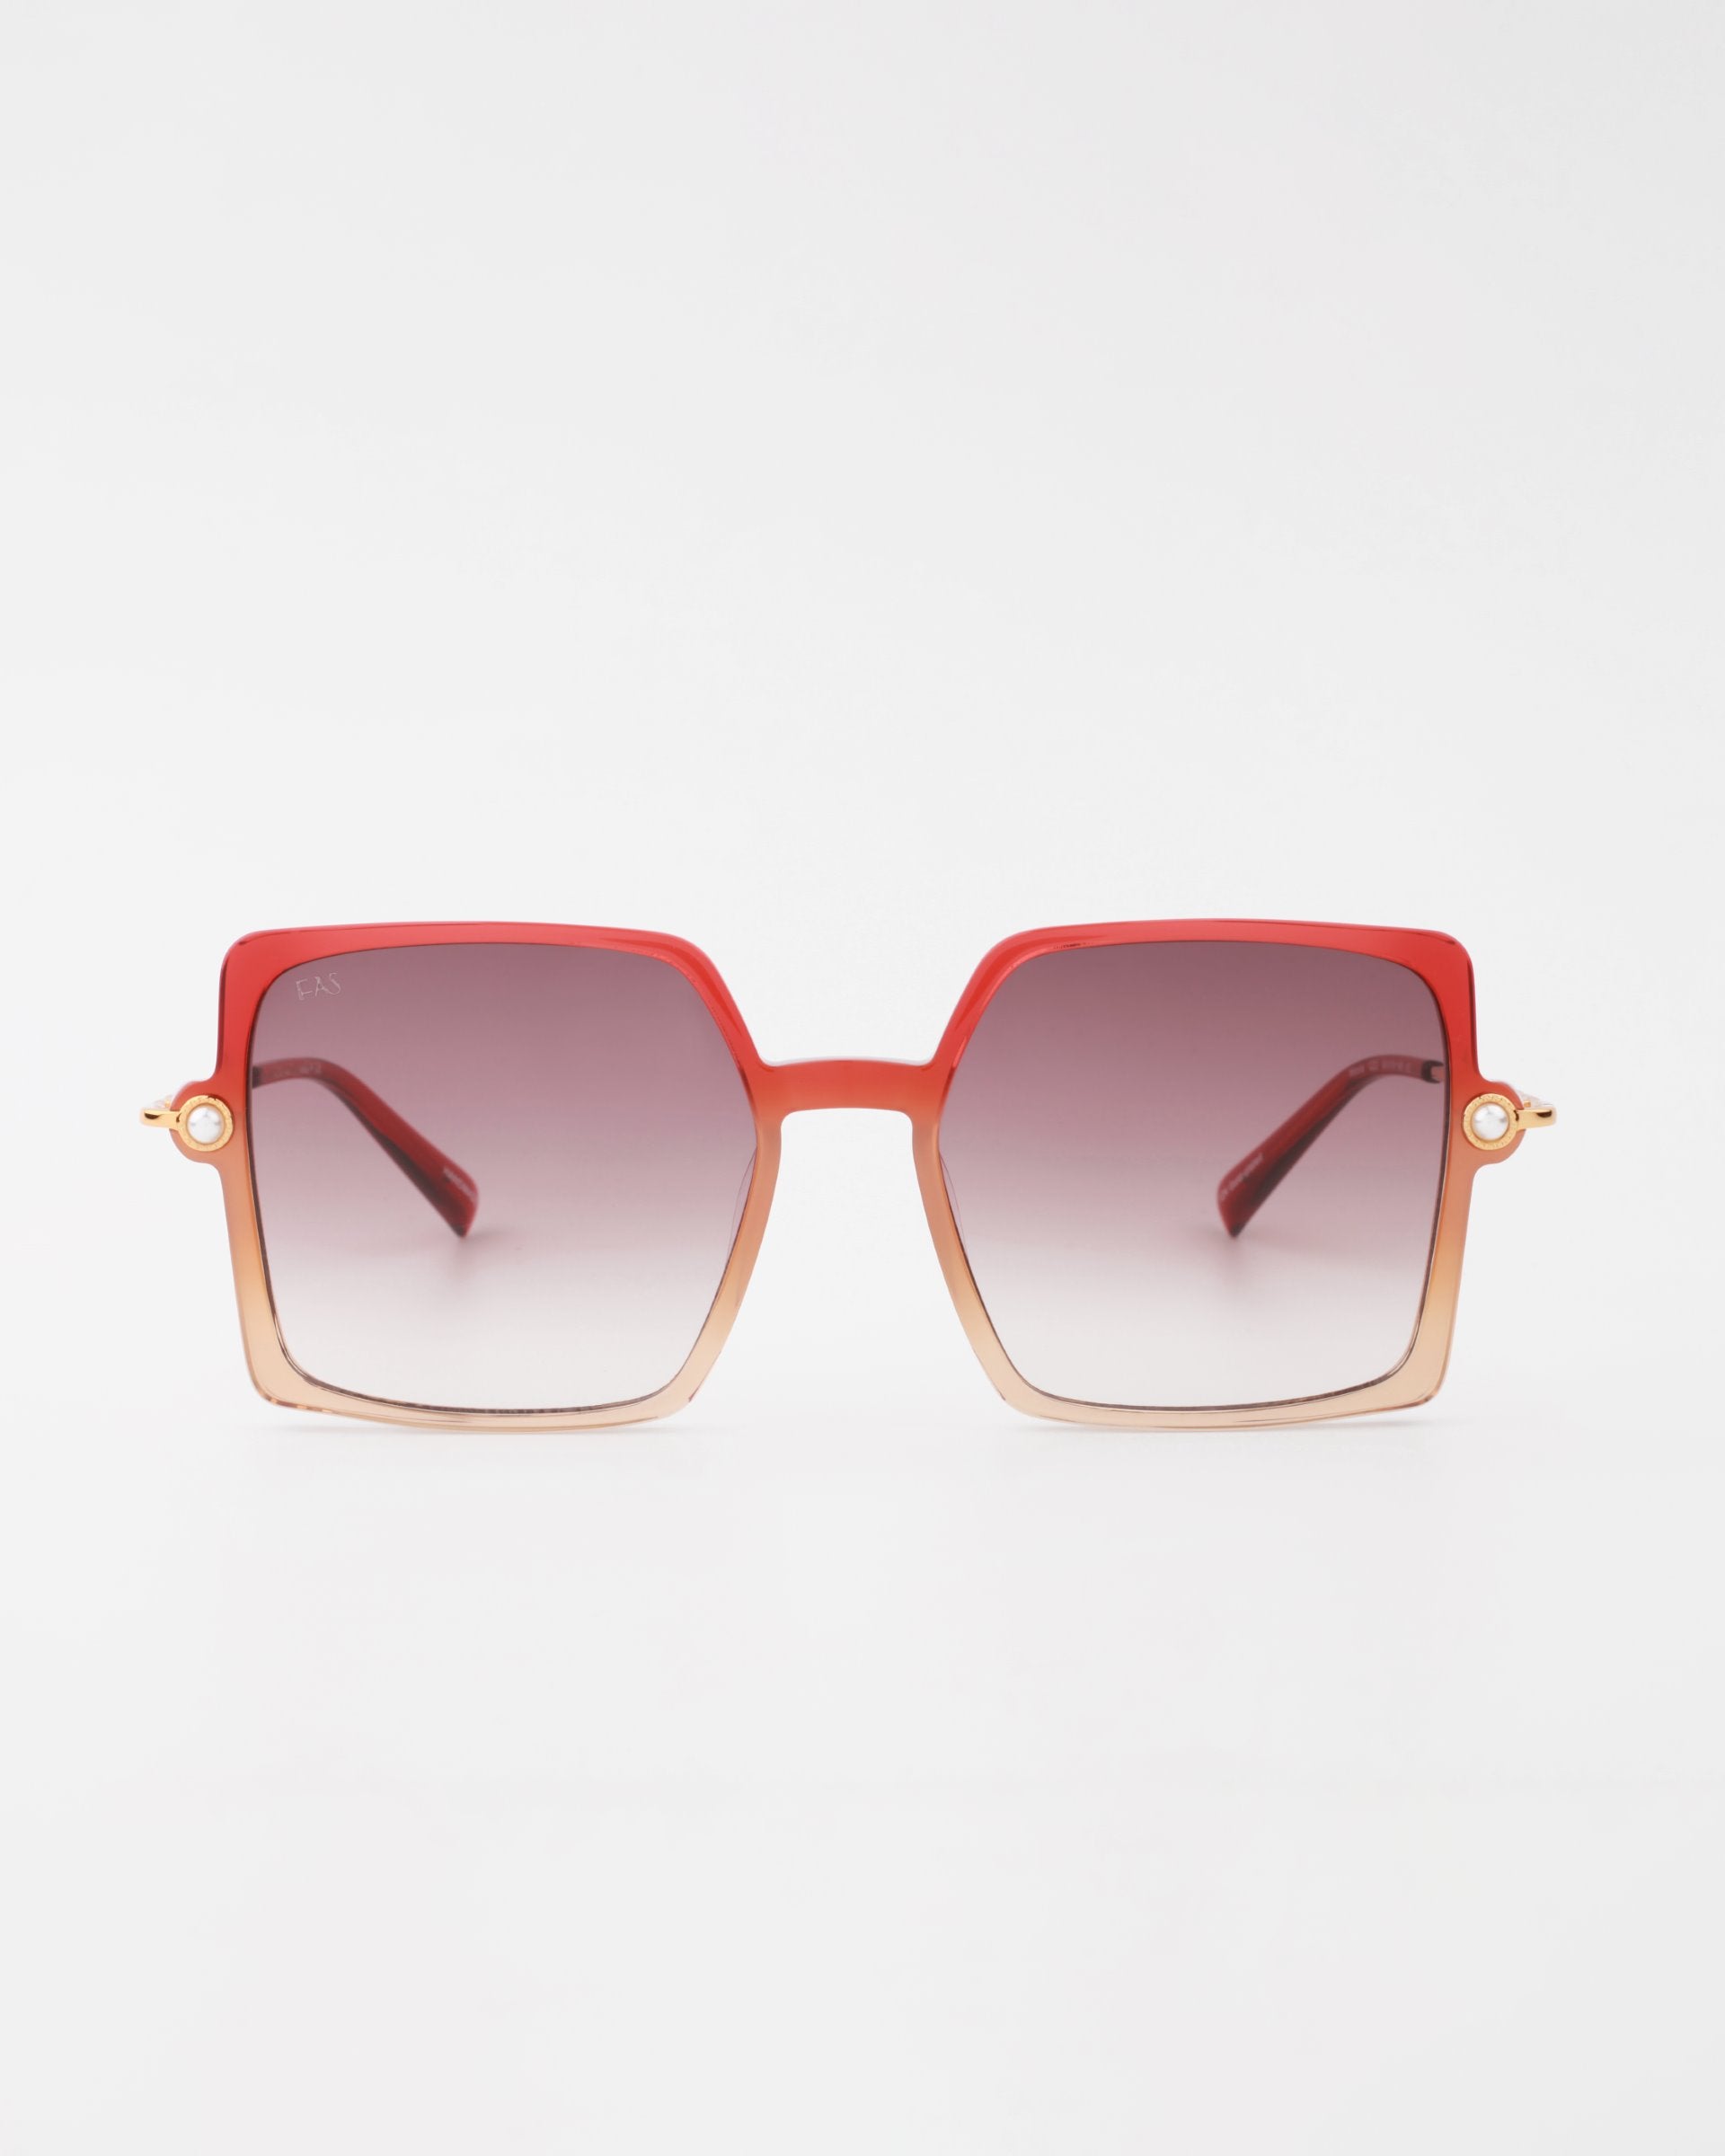 A pair of stylish handmade acetate For Art's Sake® Moxie sunglasses with large, gradient square lenses that transition from dark gray at the top to lighter shades towards the bottom. The frames are ombre, blending from red to a lighter tan hue with 18-karat gold-plated arms and offering full UVA & UVB protection.